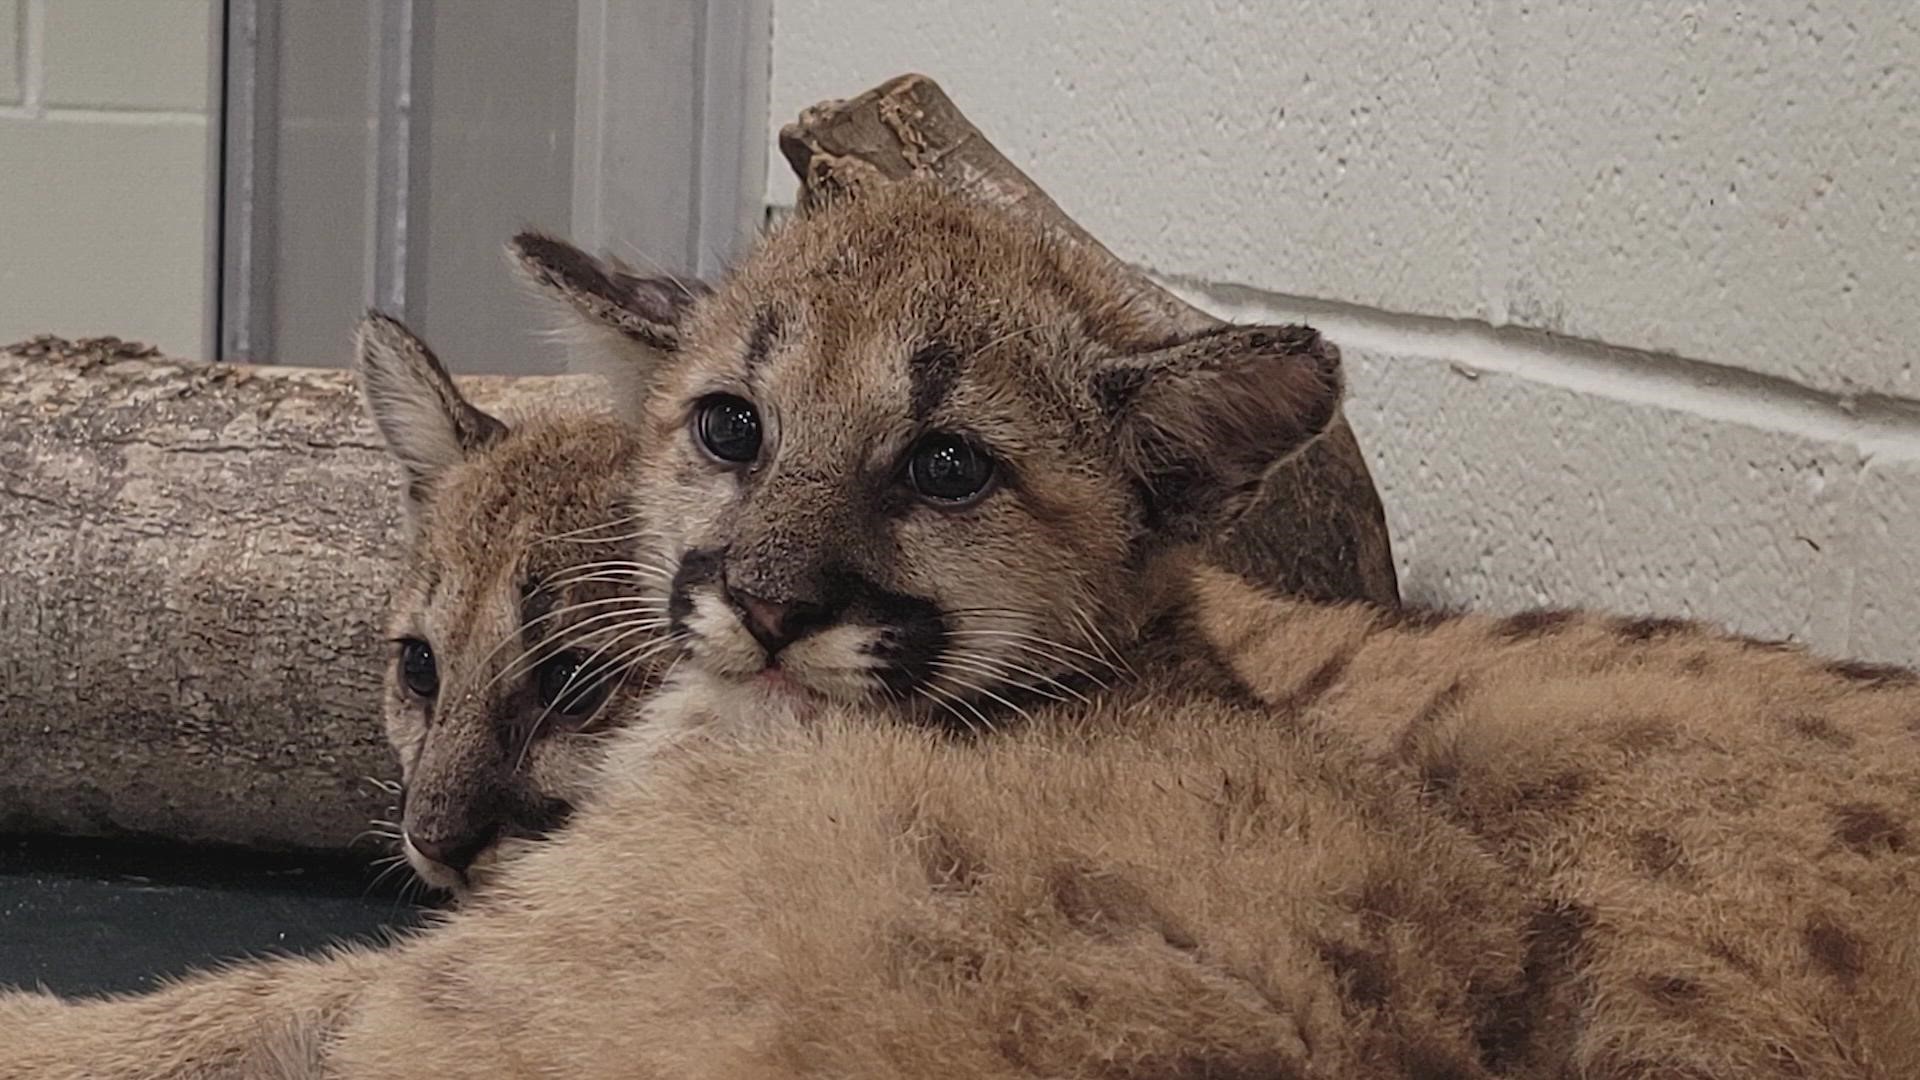 The Houston Zoo just got a whole lot fluffier after two orphan cougar cubs, one of which was introduced as Shasta VII, found a new home at their facility.